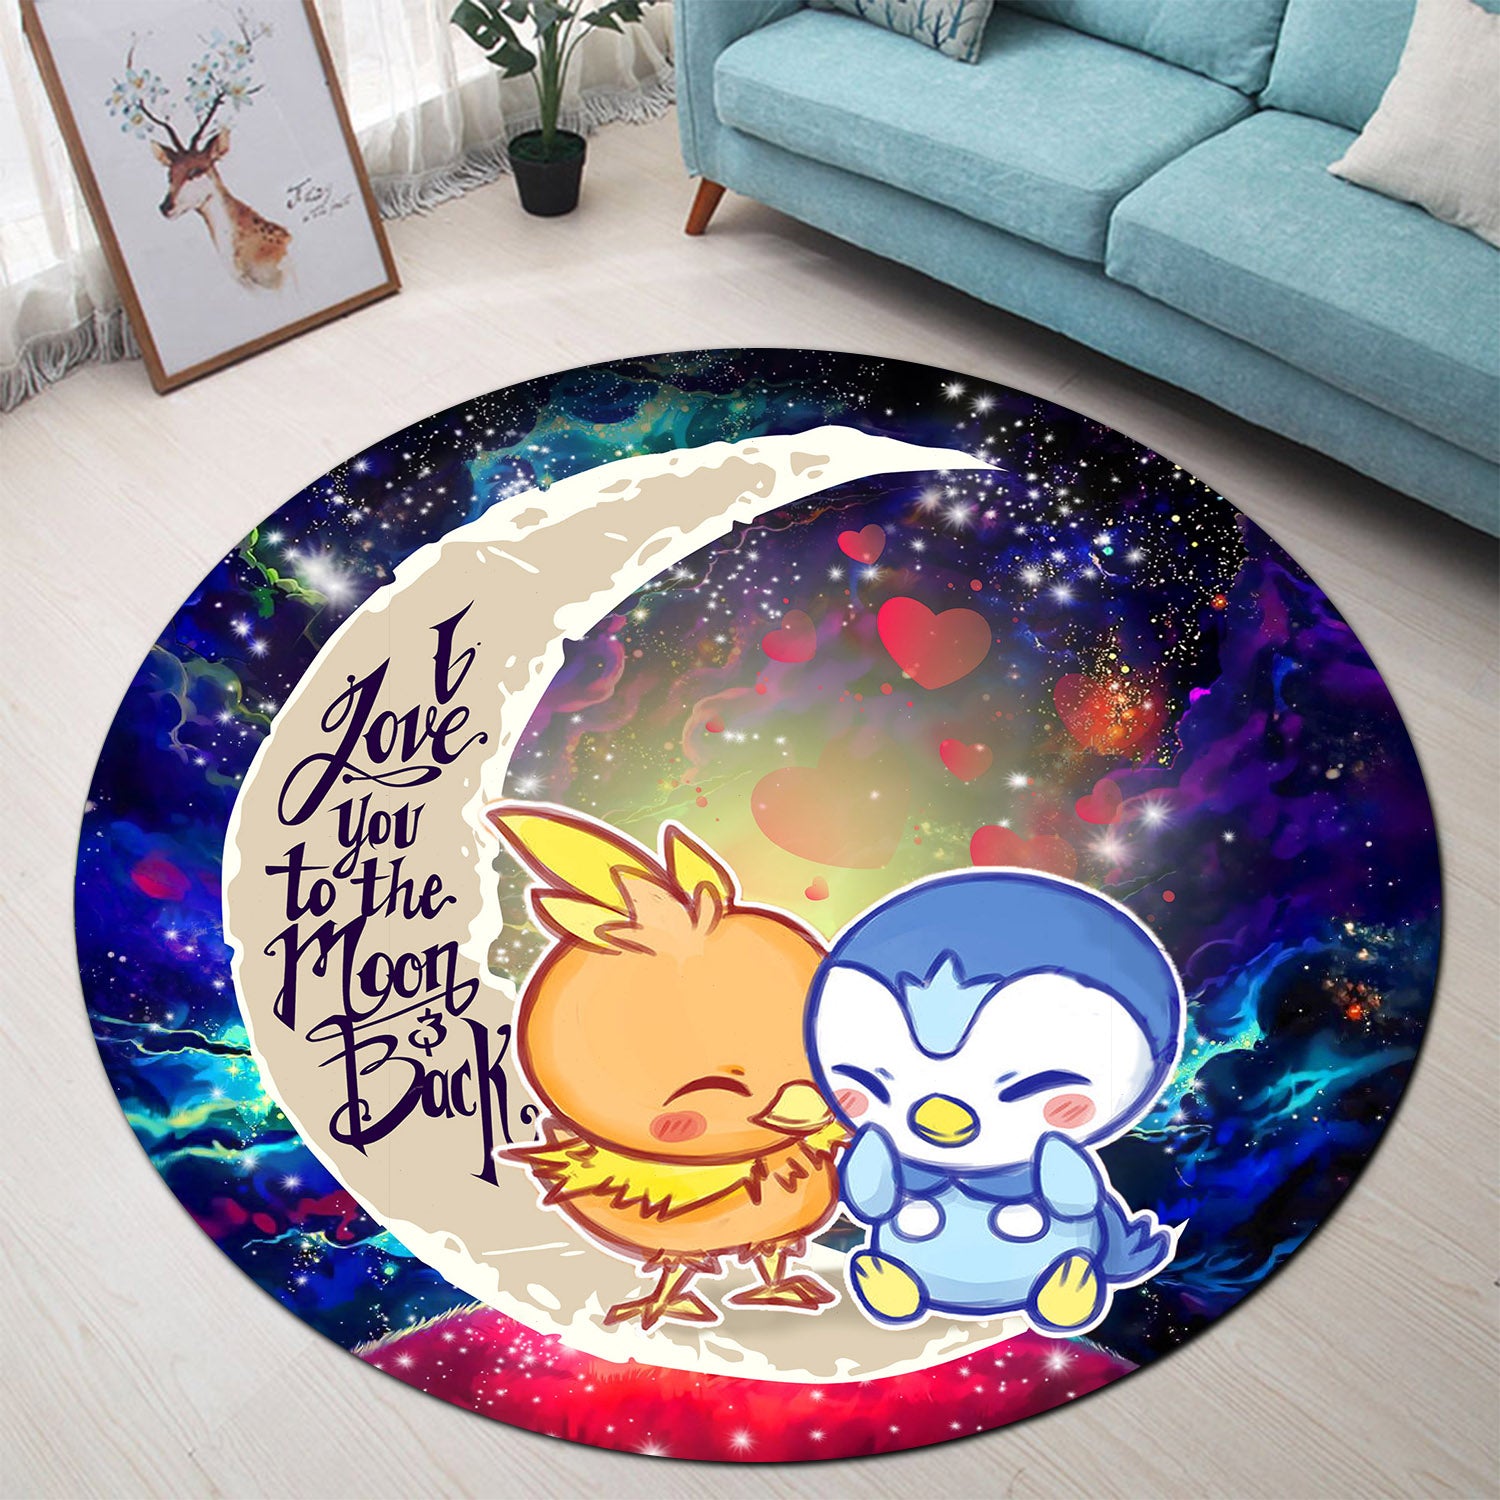 Pokemon Torchic Piplup Love You To The Moon Galaxy Round Carpet Rug Bedroom Livingroom Home Decor Nearkii